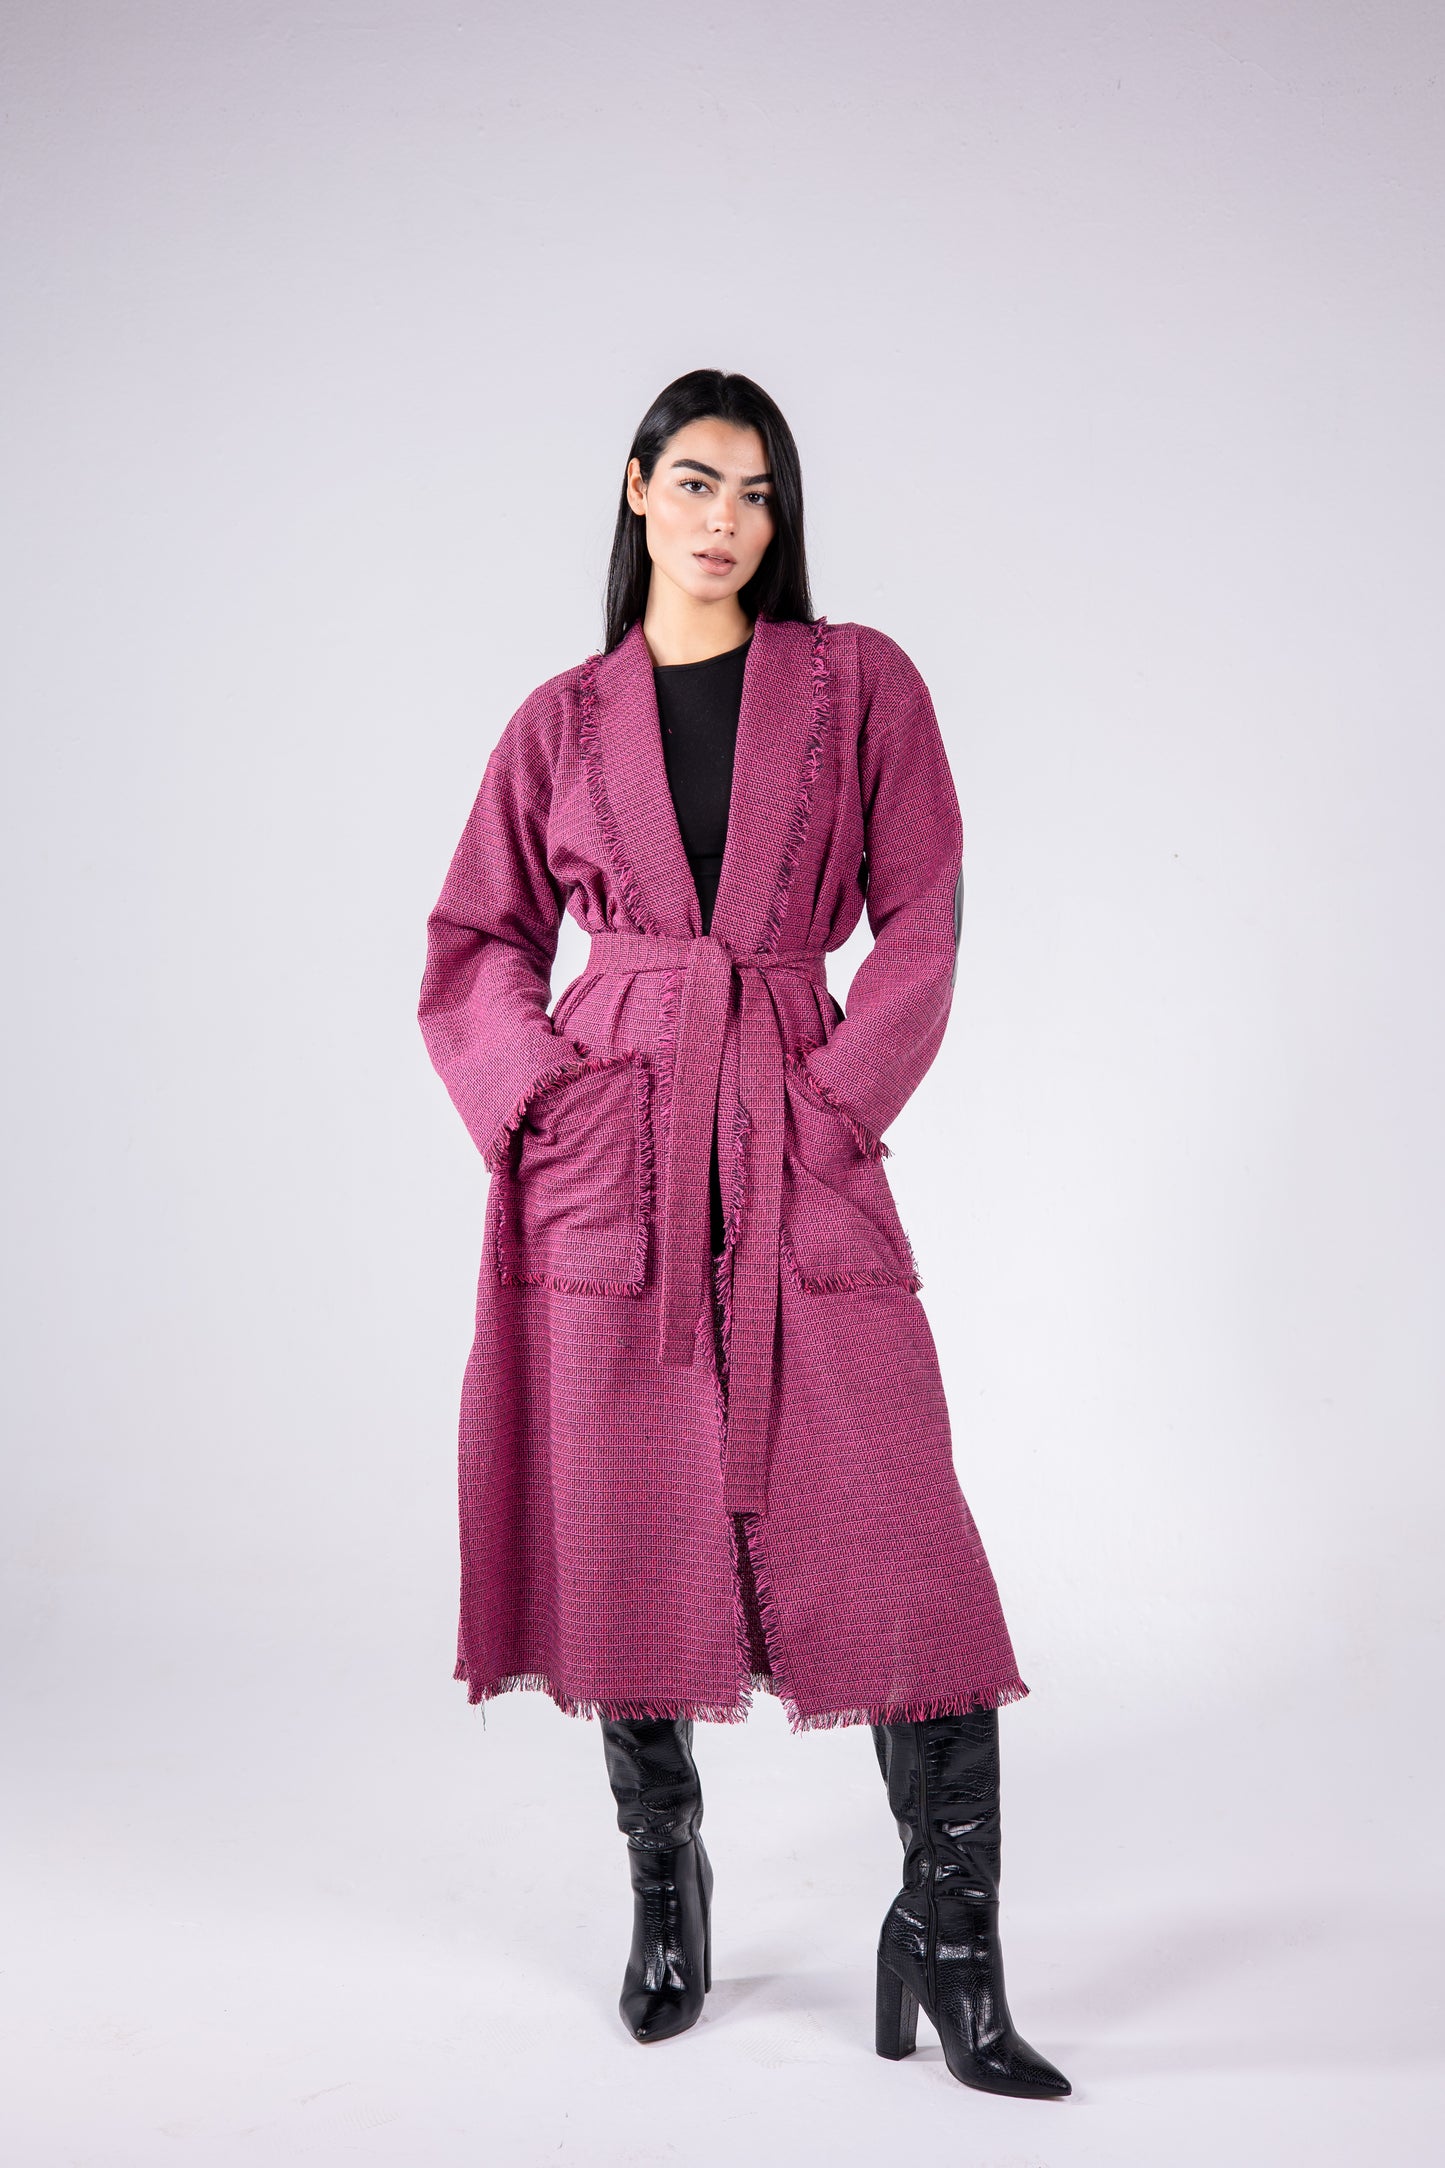 The eve manteau in maroon pink